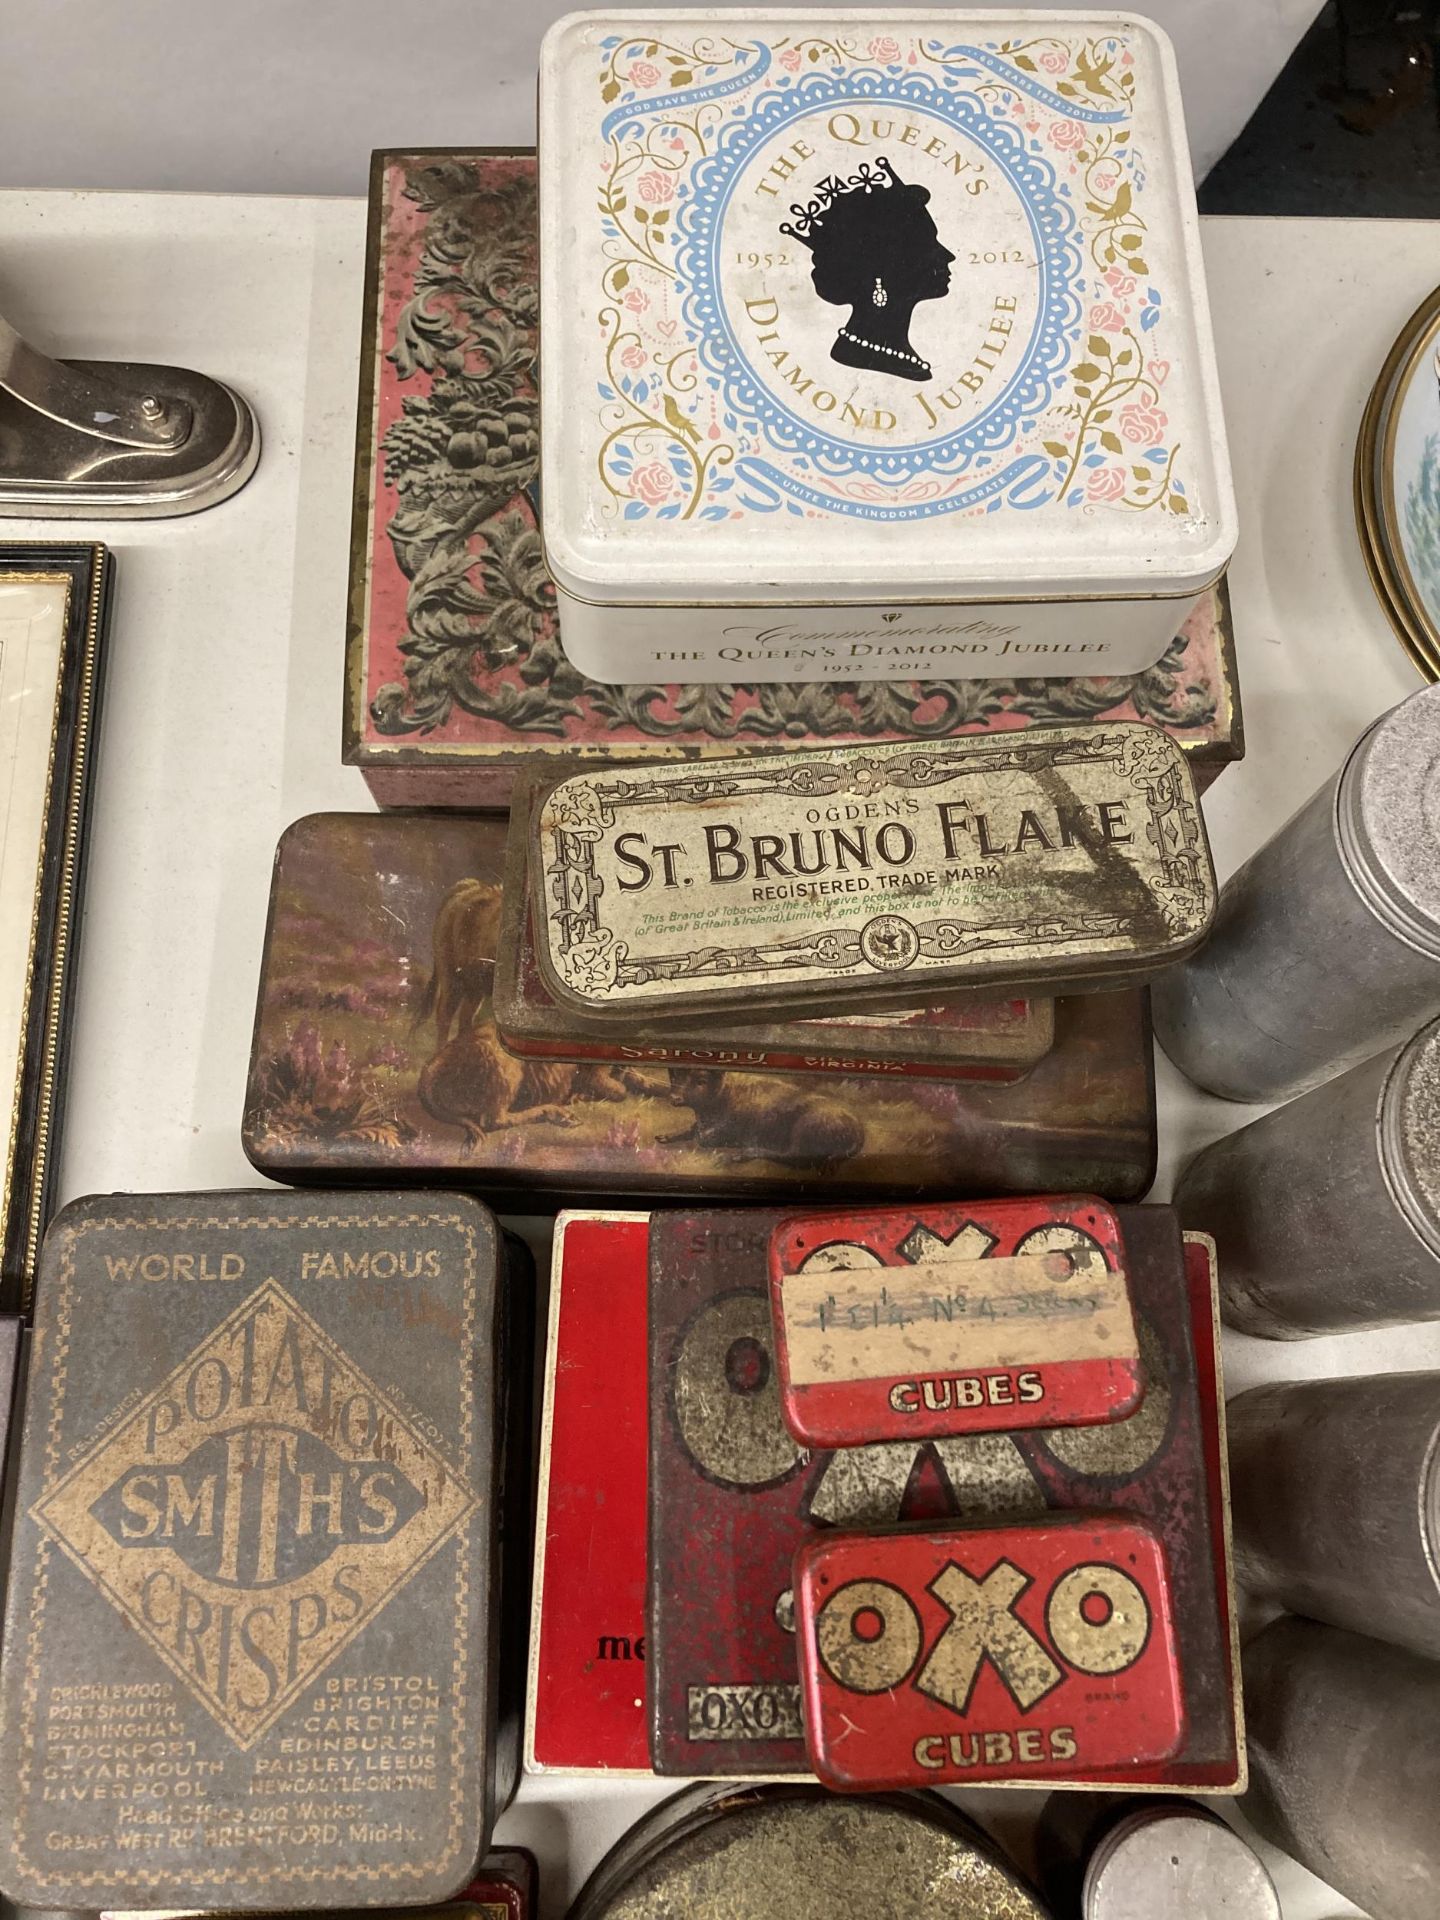 A LARGE QUANTITY OF VINTAGE TINS TO INCLUDE MEDICINAL, SMITH'S CRISPS, OXO, BISCUIT, ETC - Image 2 of 5